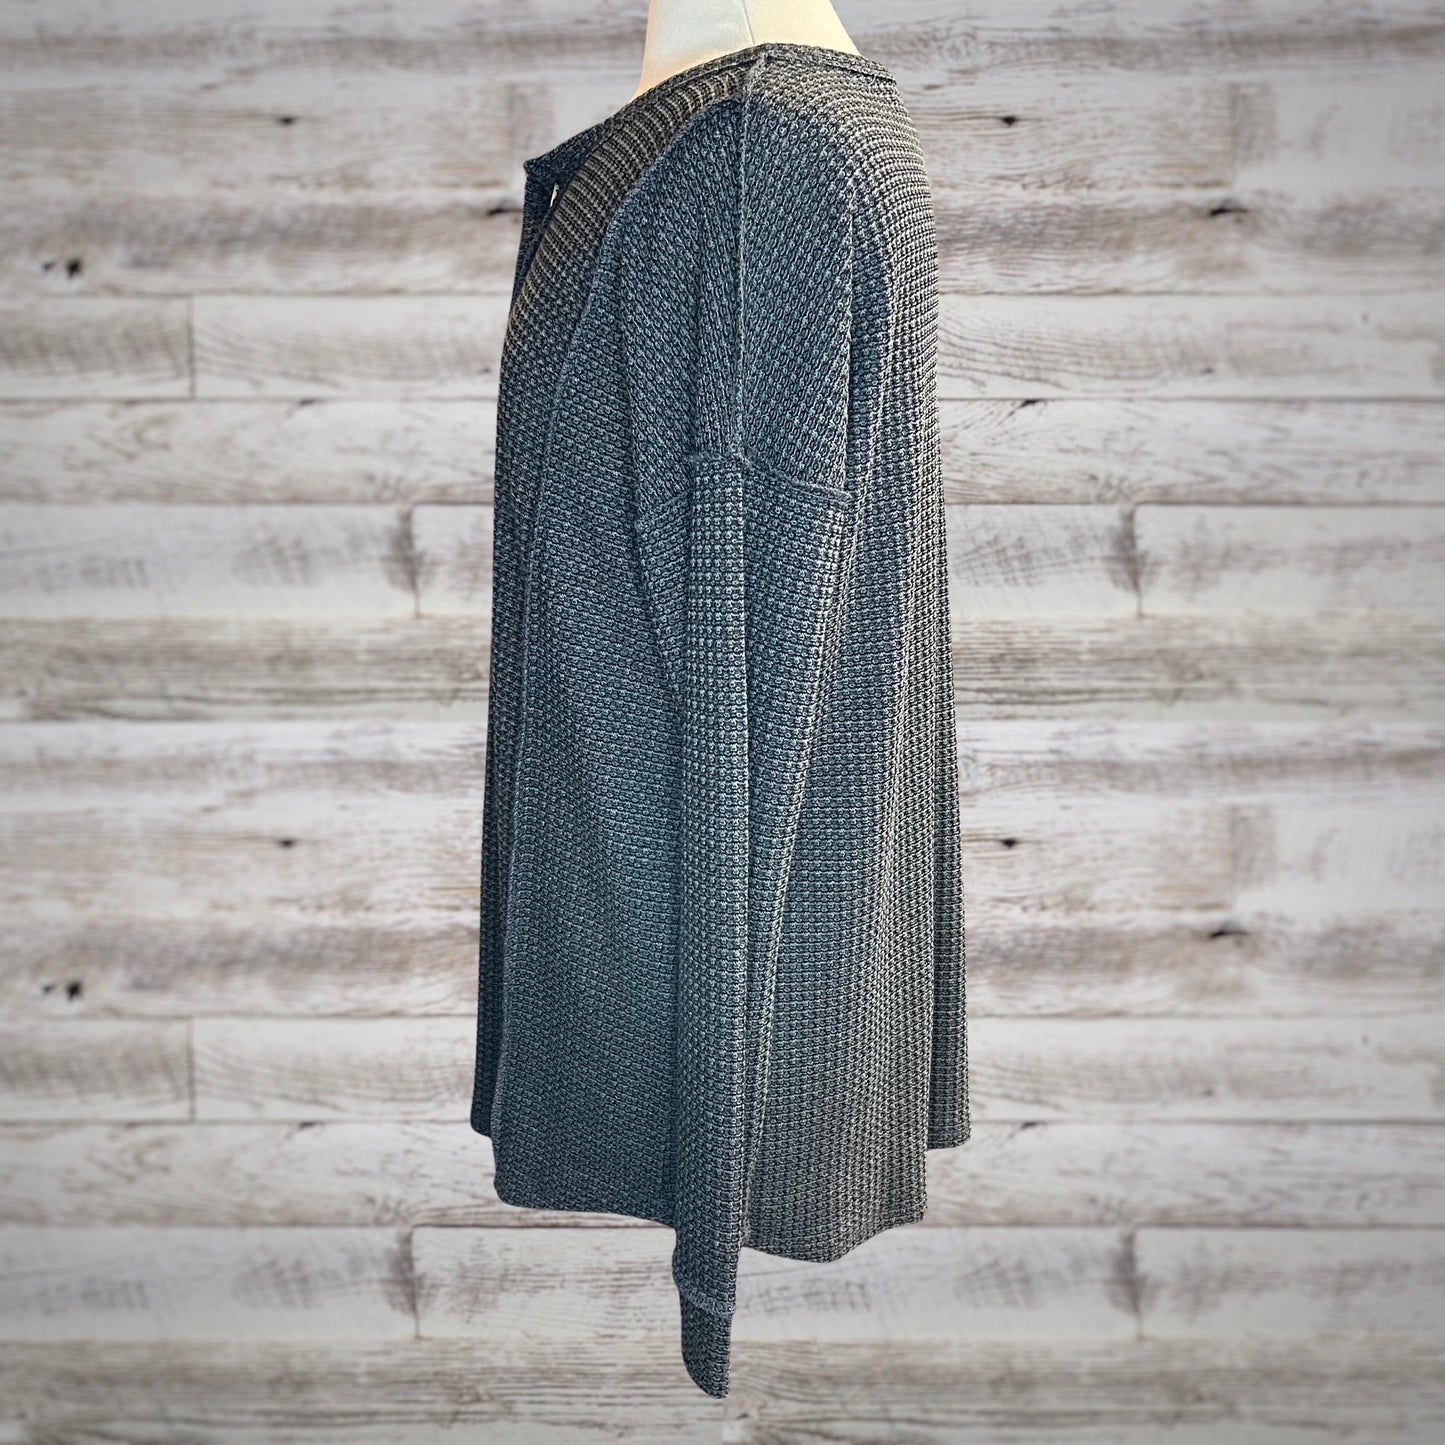 PLUS Waffle Knit Long Sleeve Henley Top in Charcoal